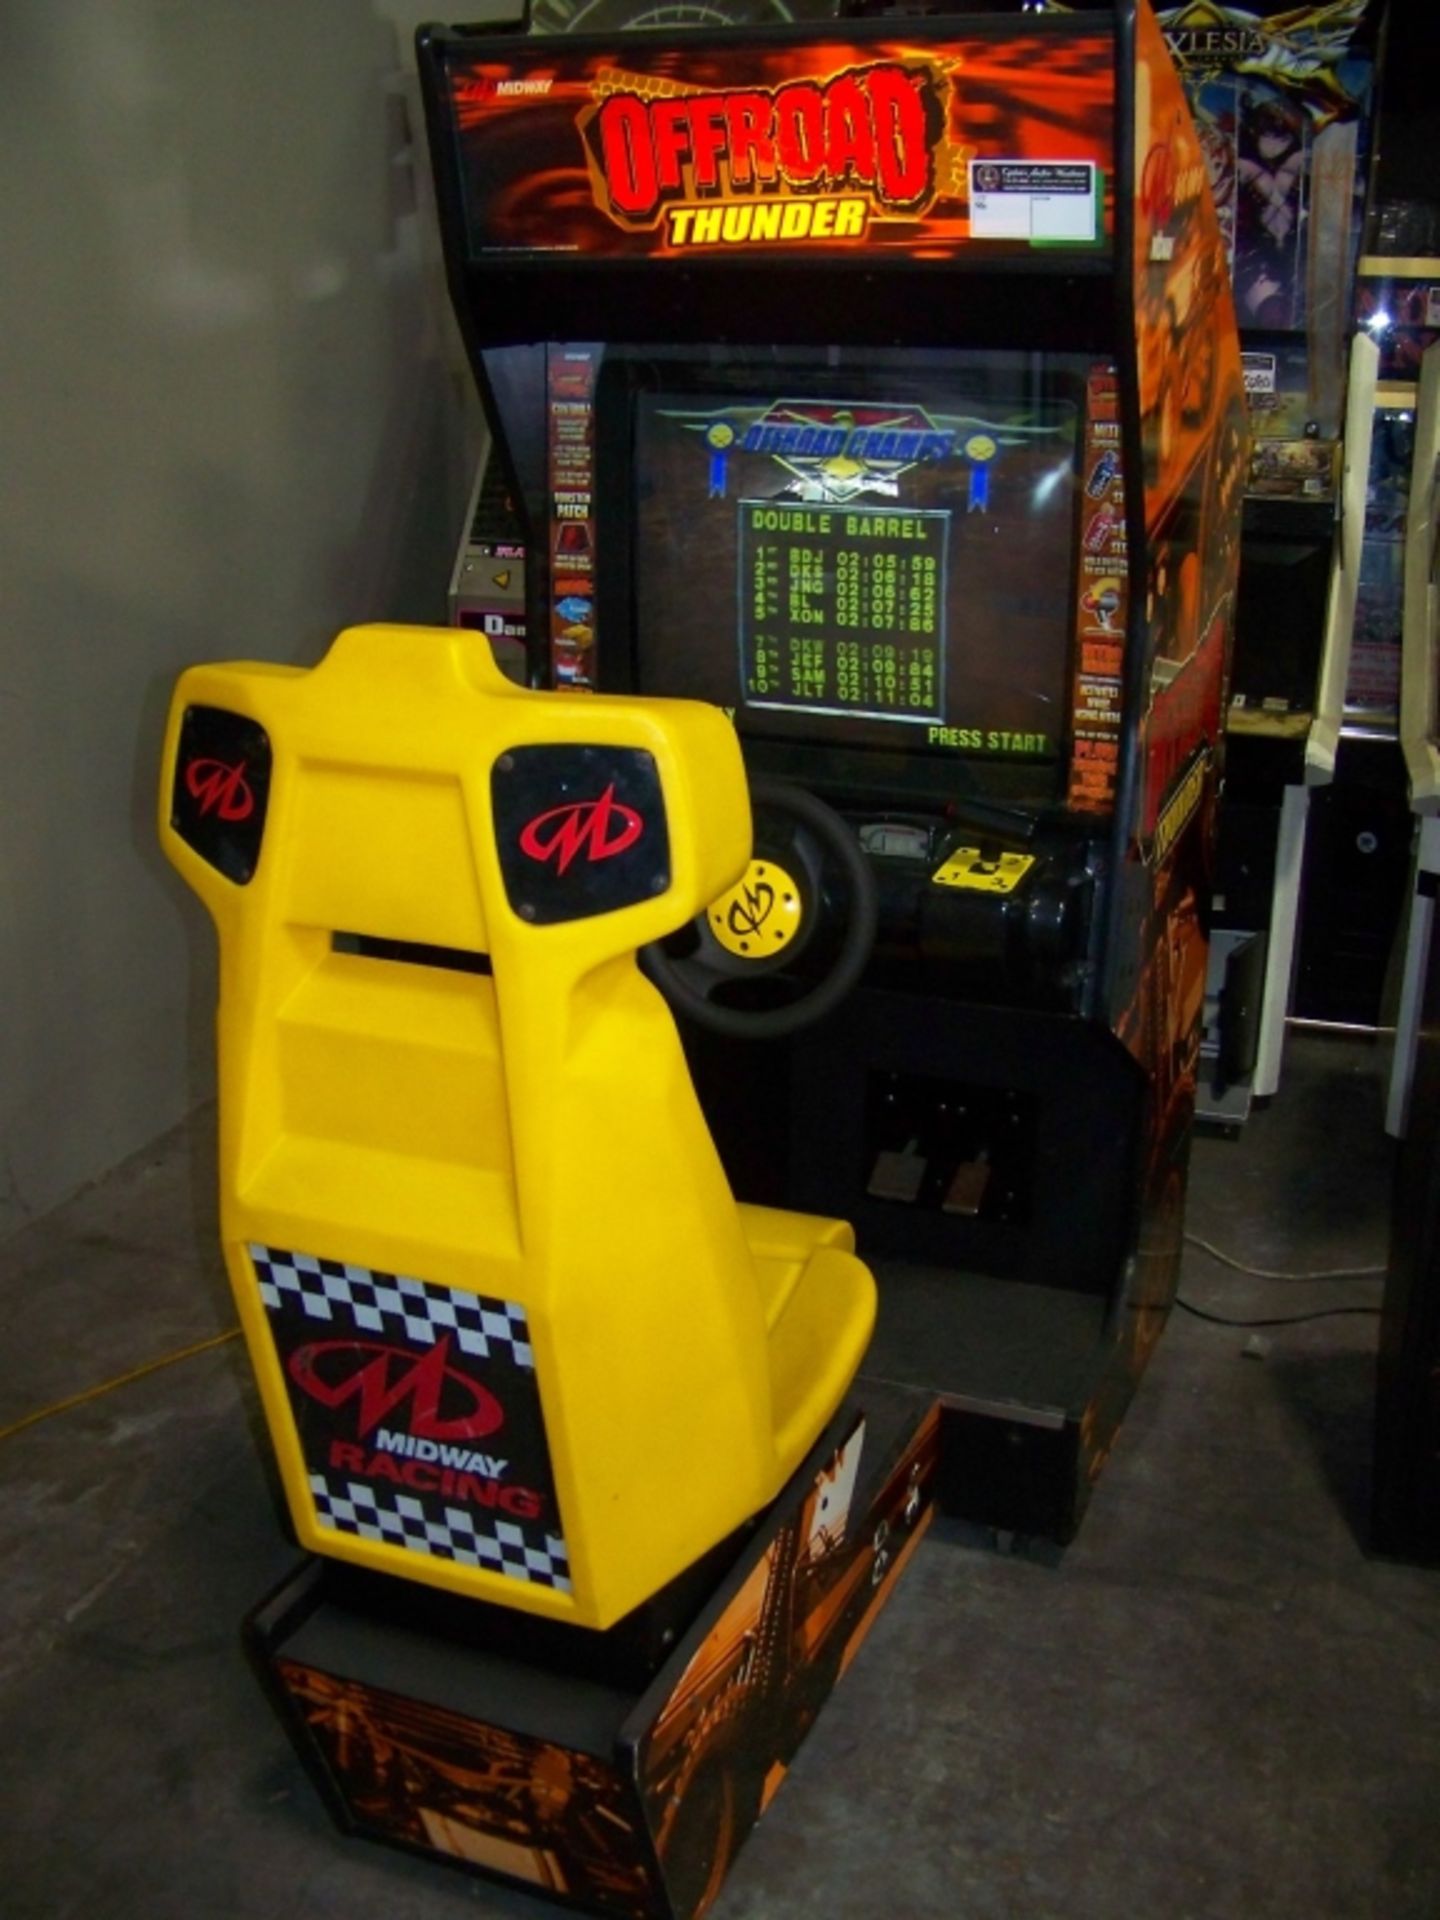 OFFROAD THUNDER MIDWAY RACING ARCADE GAME - Image 6 of 7